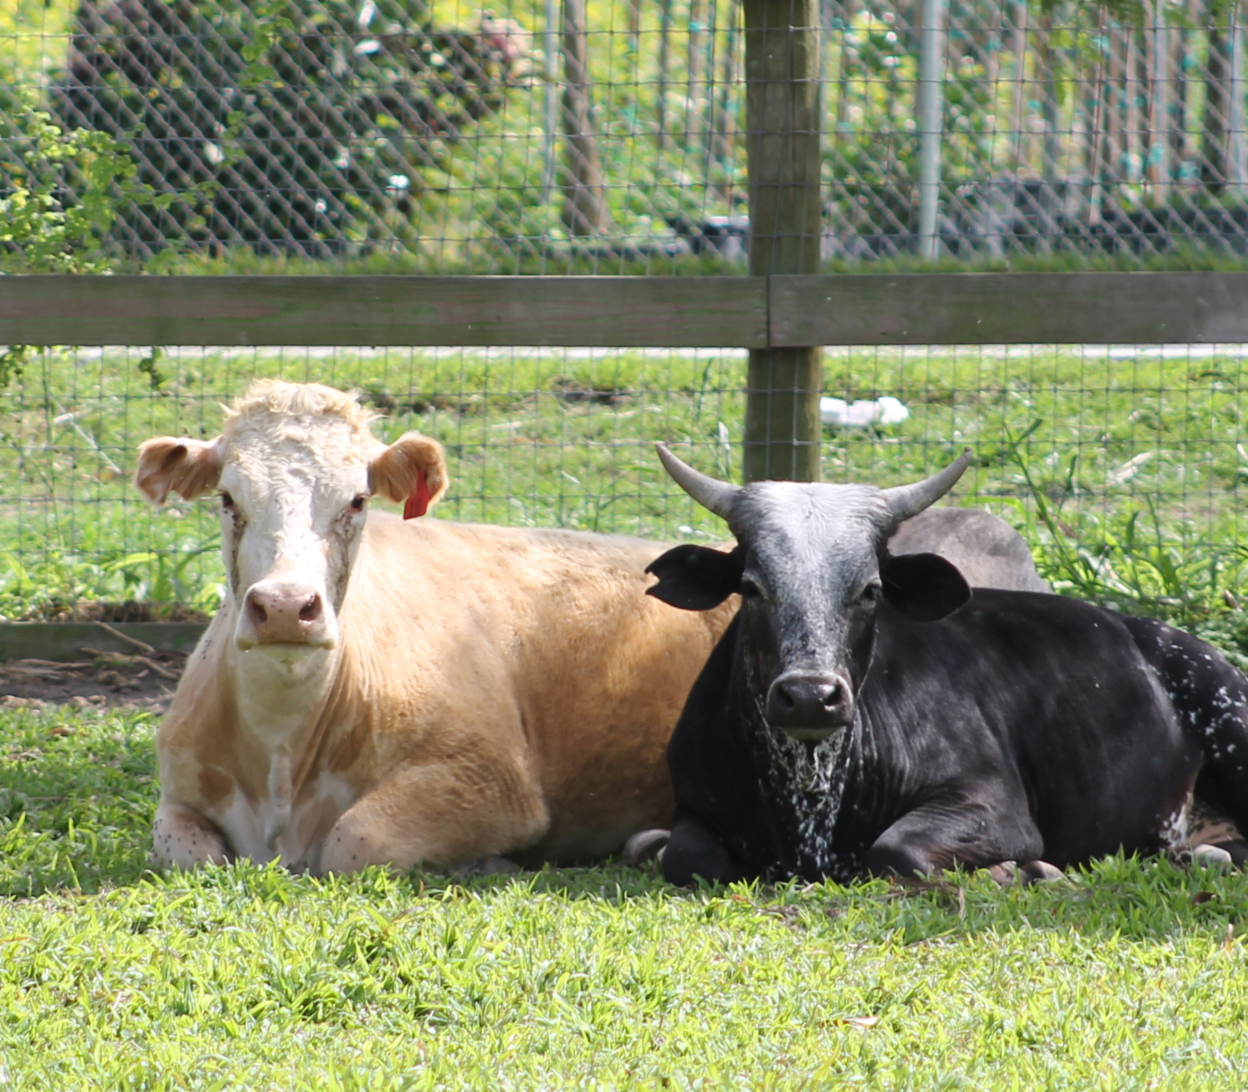 SFSPCA rescues livestock like these cows, everyday